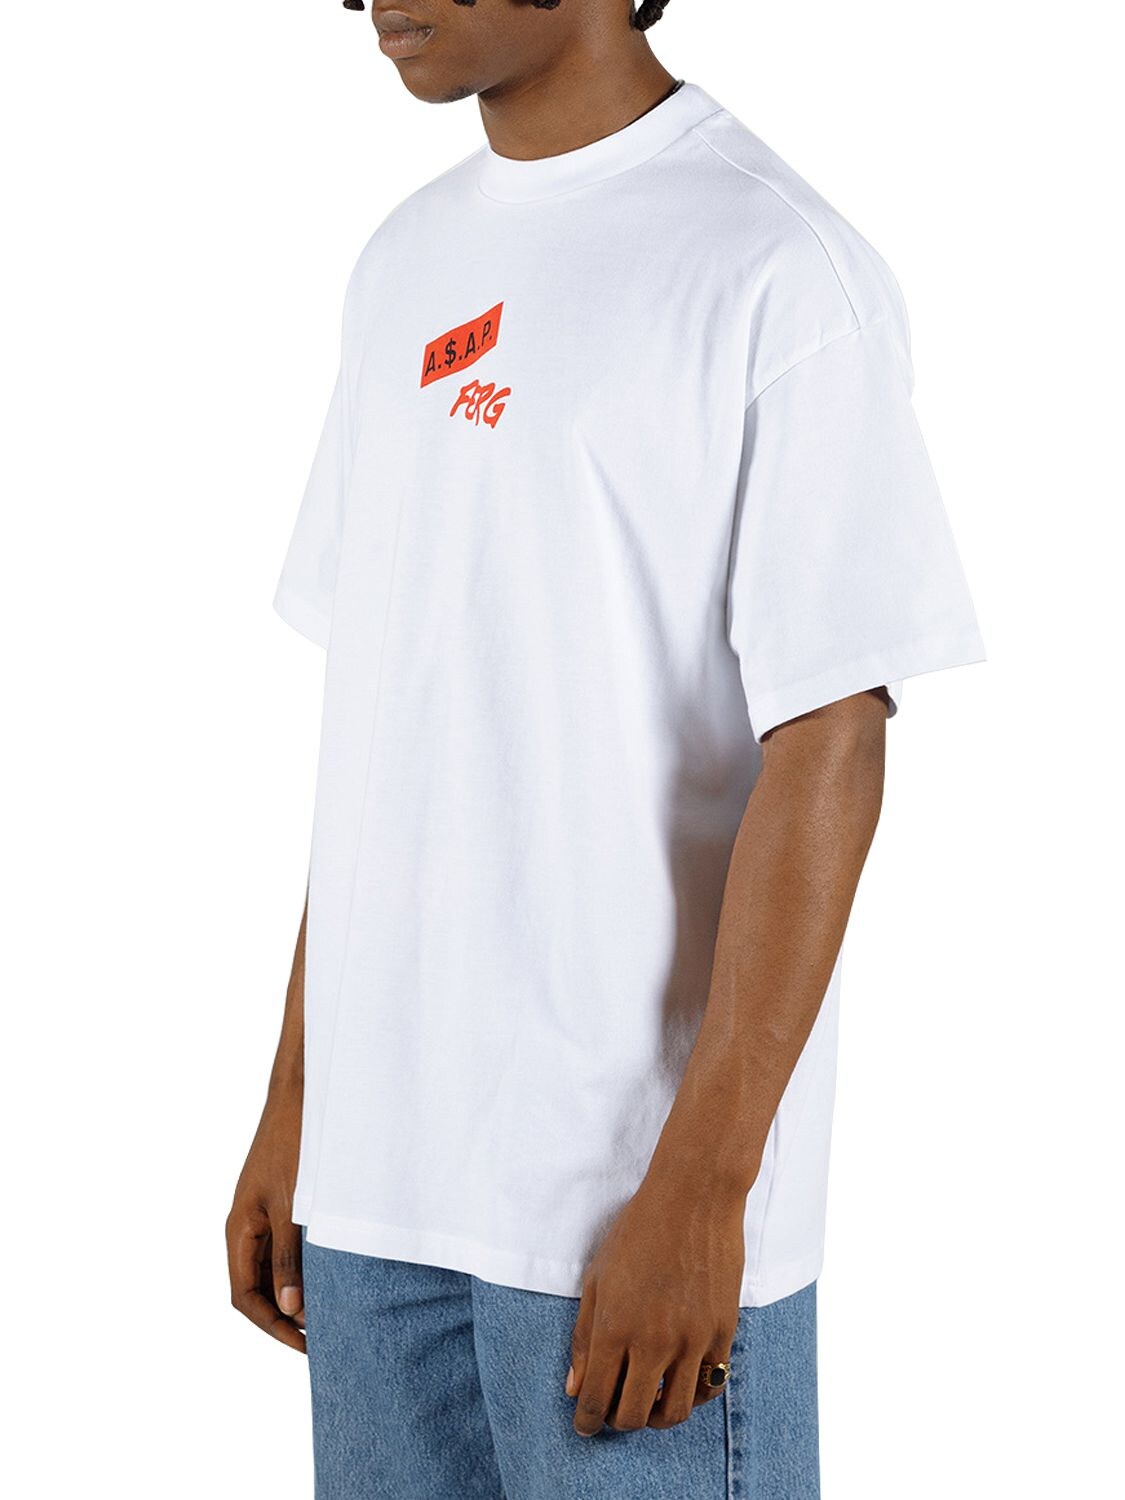 A$ap Ferg By Platformx Oversize Printed Cotton Jersey T-shirt In White